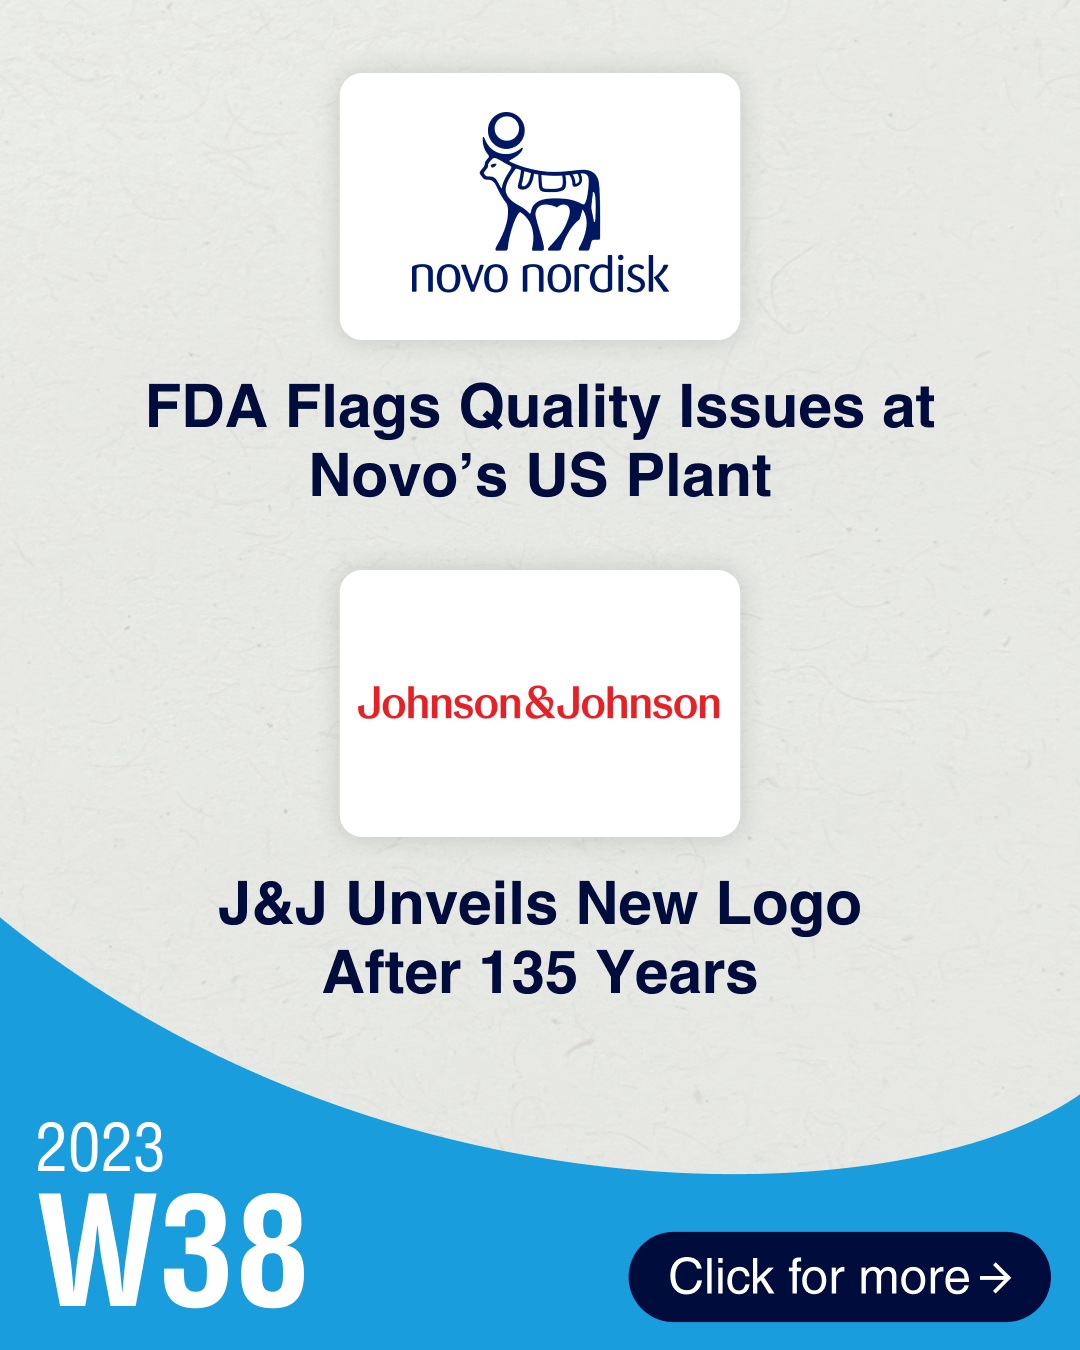 FDA flags quality issues at Novo’s Clayton plant; J&J renews identity after 135 years